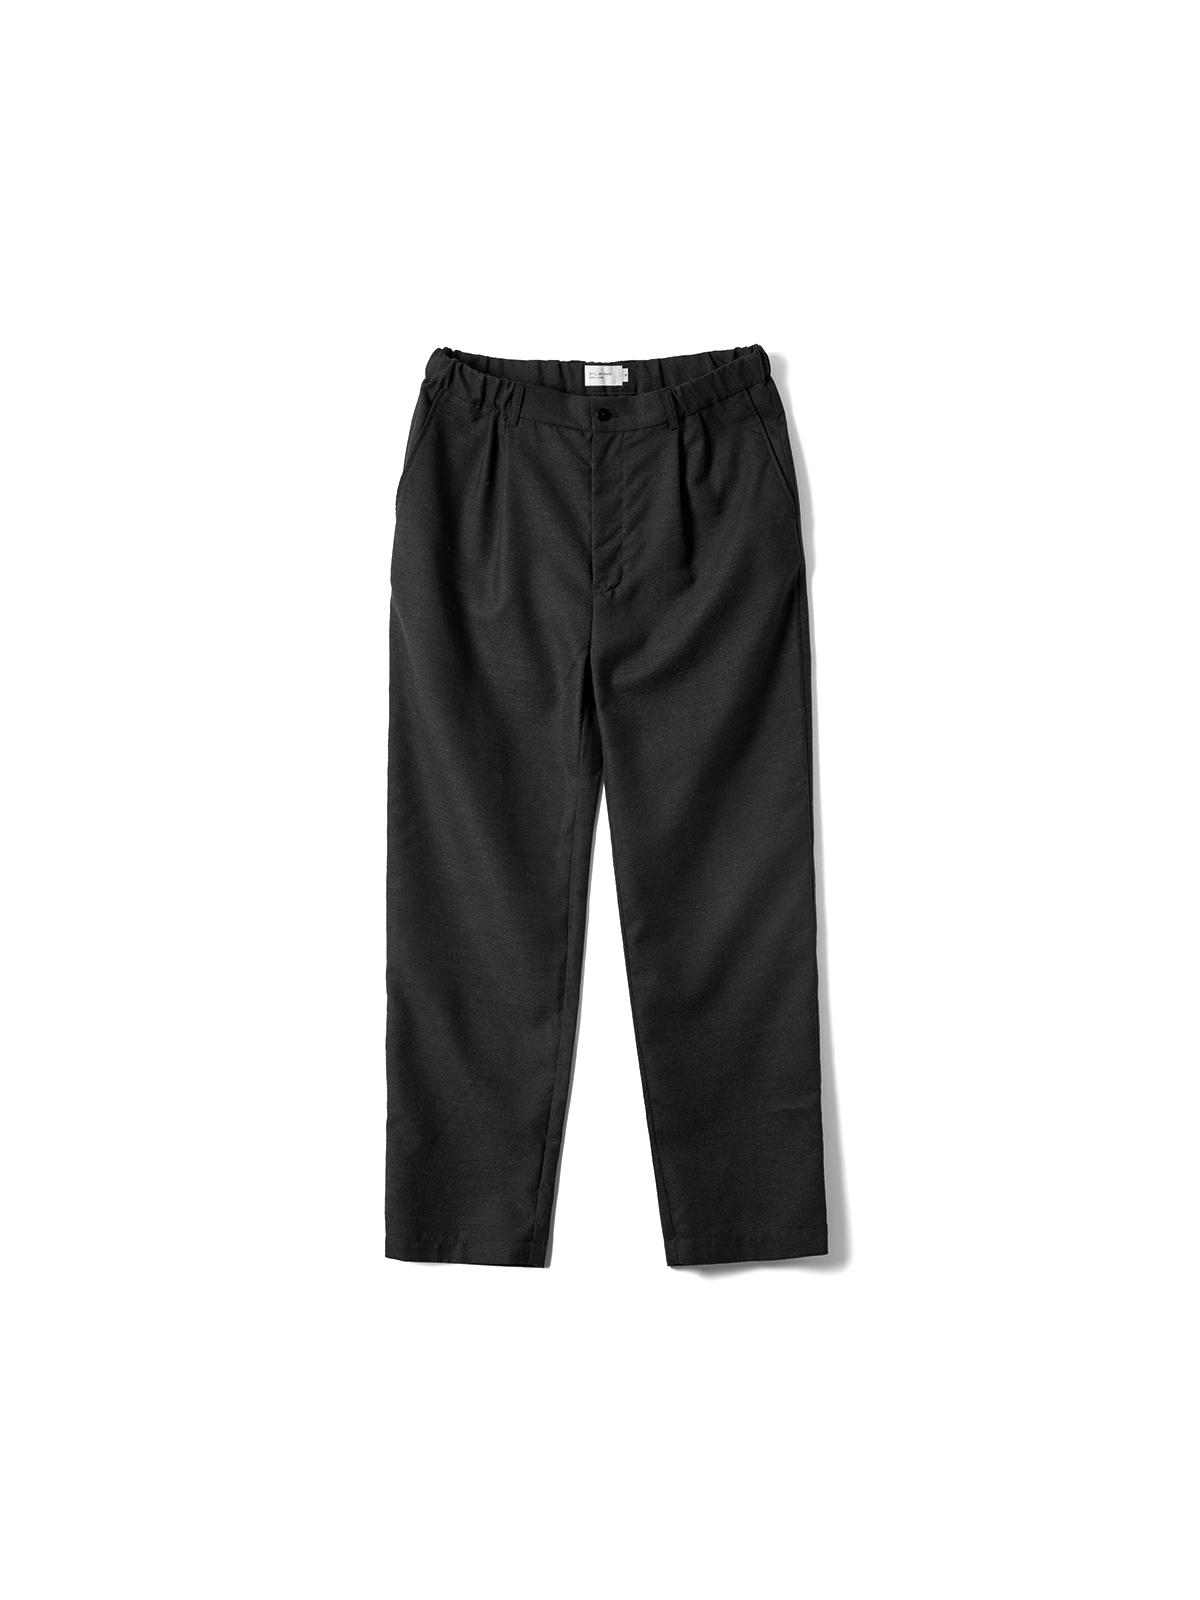 RELAXED WOOL PANTS (CHARCOAL)